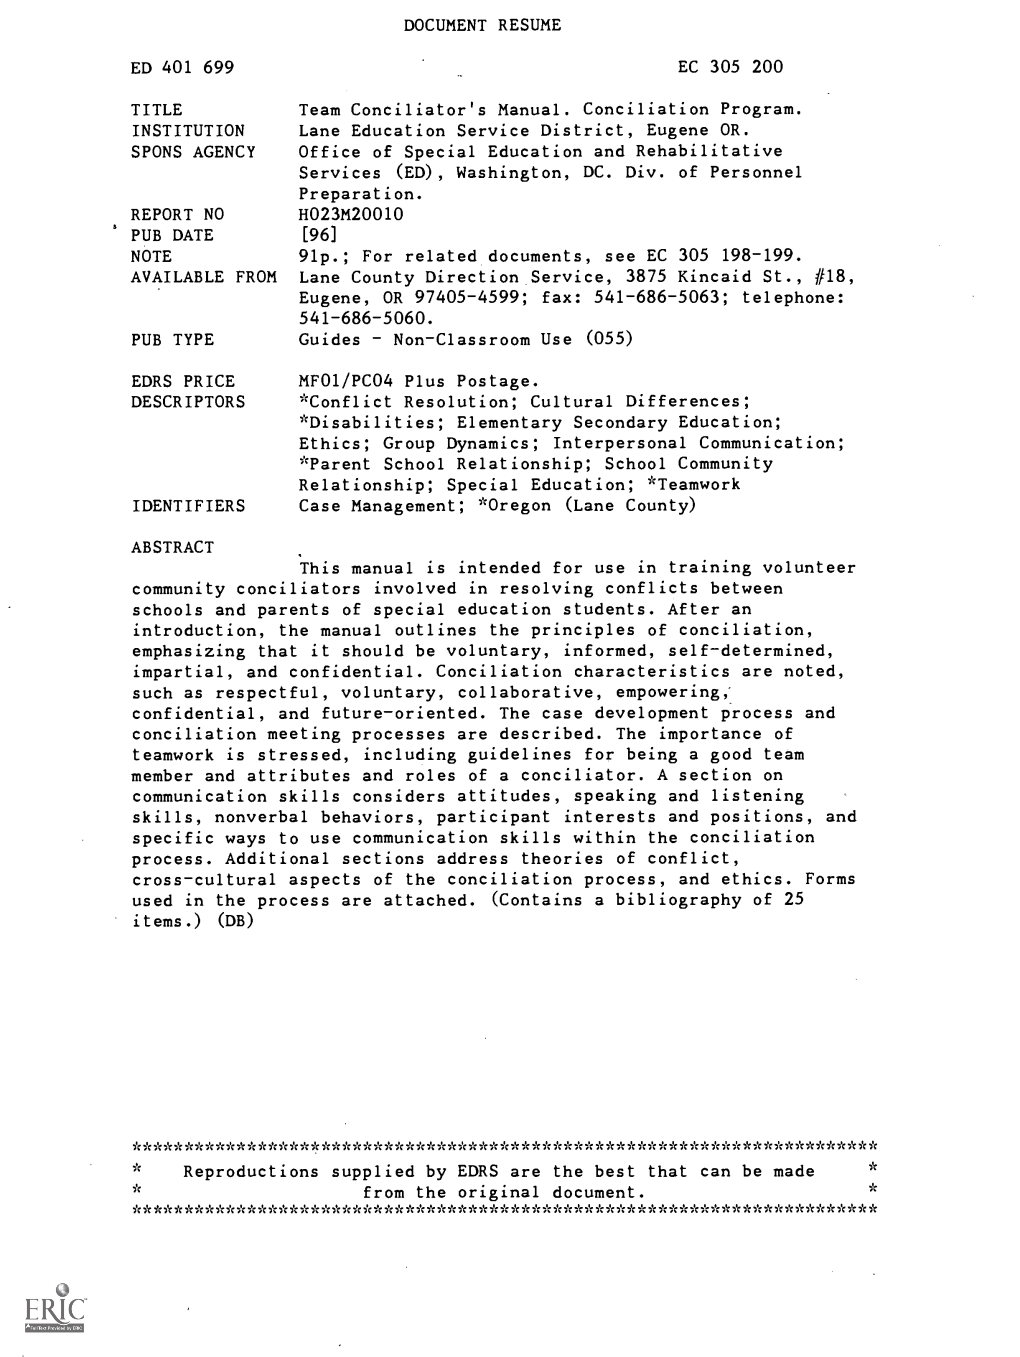 DOCUMENT RESUME Team Conciliator's Manual. Conciliation Program. Lane Education Service District, Eugene OR. Office of Special E